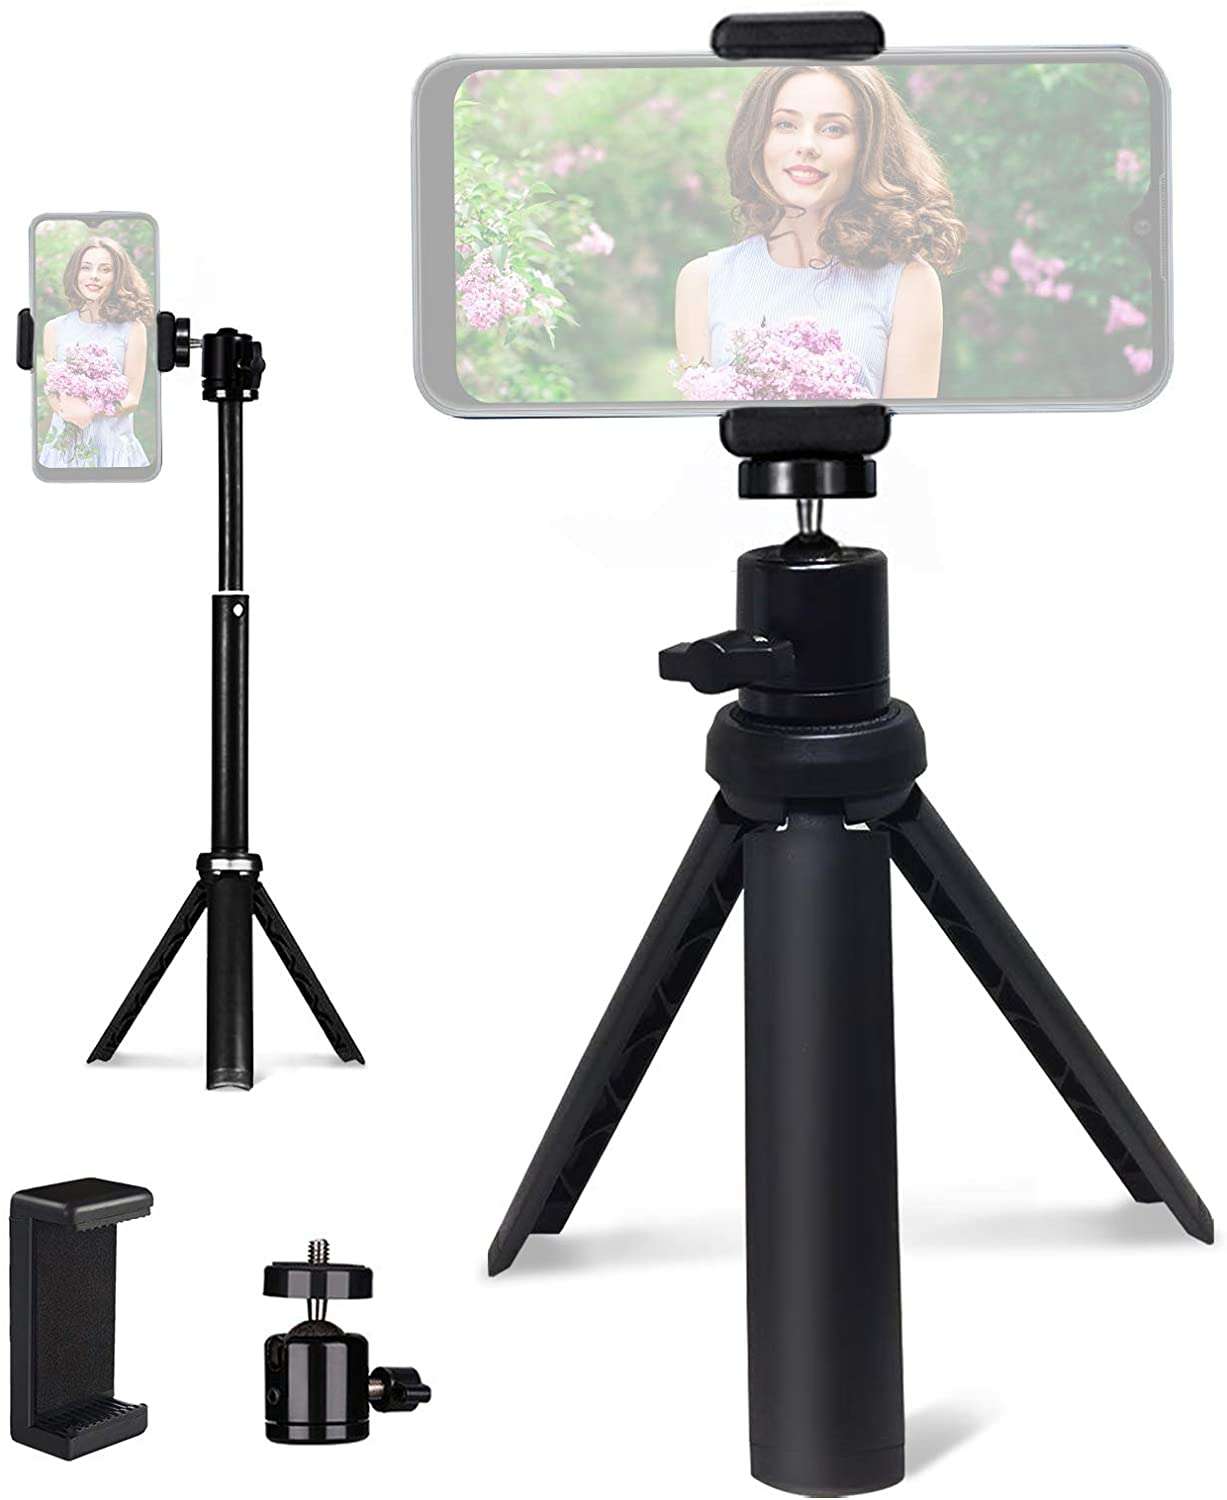 A mini tripod suitable for smartphones and cameras